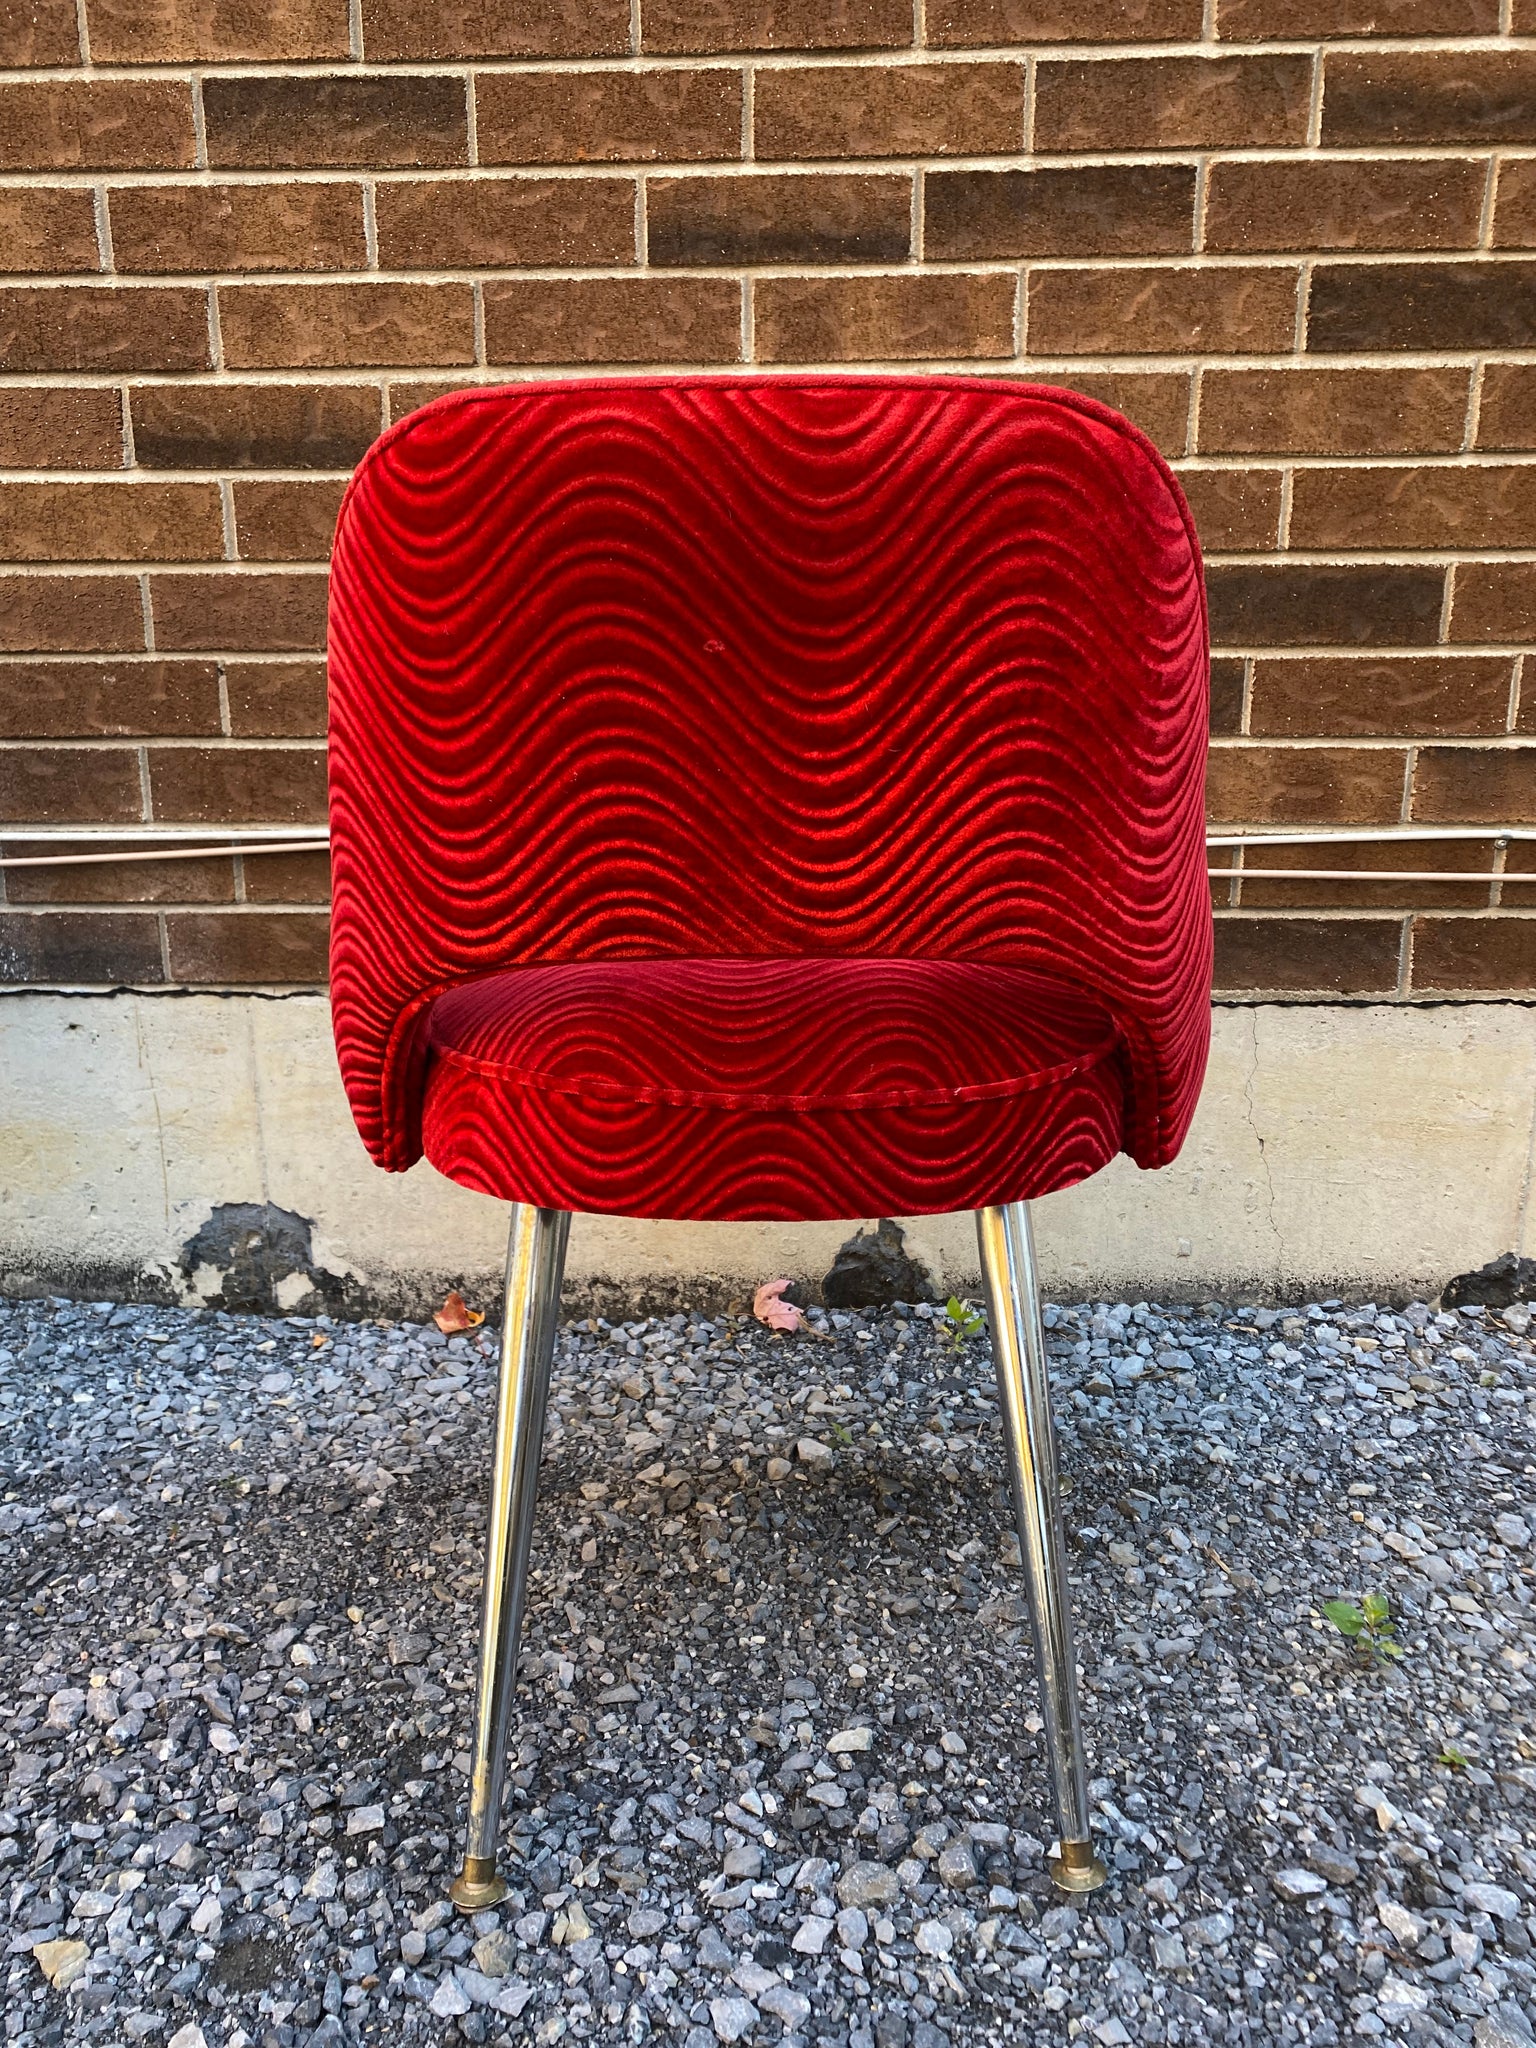 Groovy red velour & chrome chairs